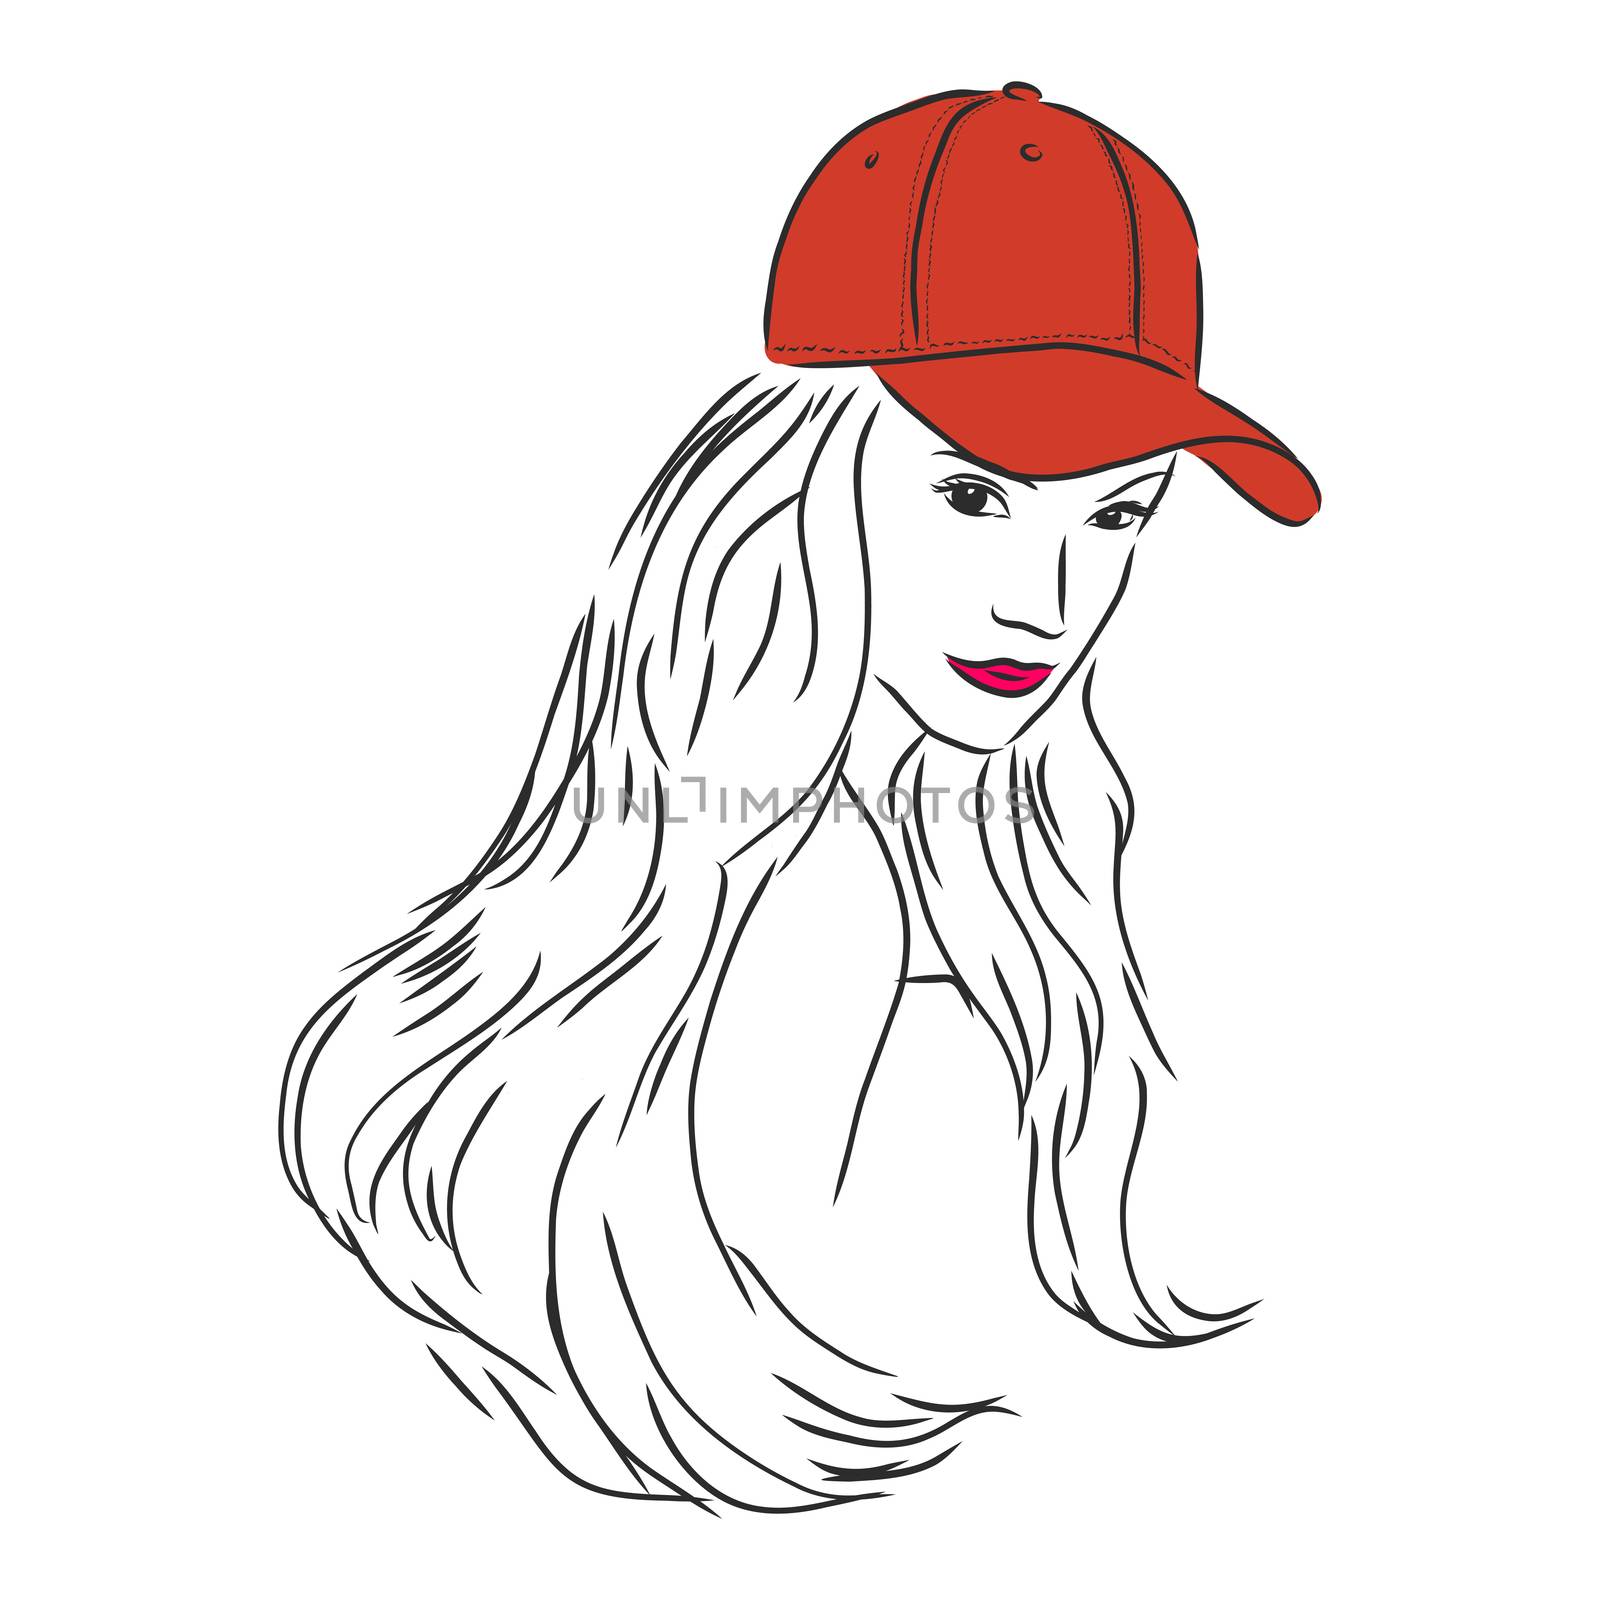 Isolated vector illustration. Pretty girl in a cap. Closeup female portrait. Hand drawn linear doodle sketch. Black silhouette on white background.